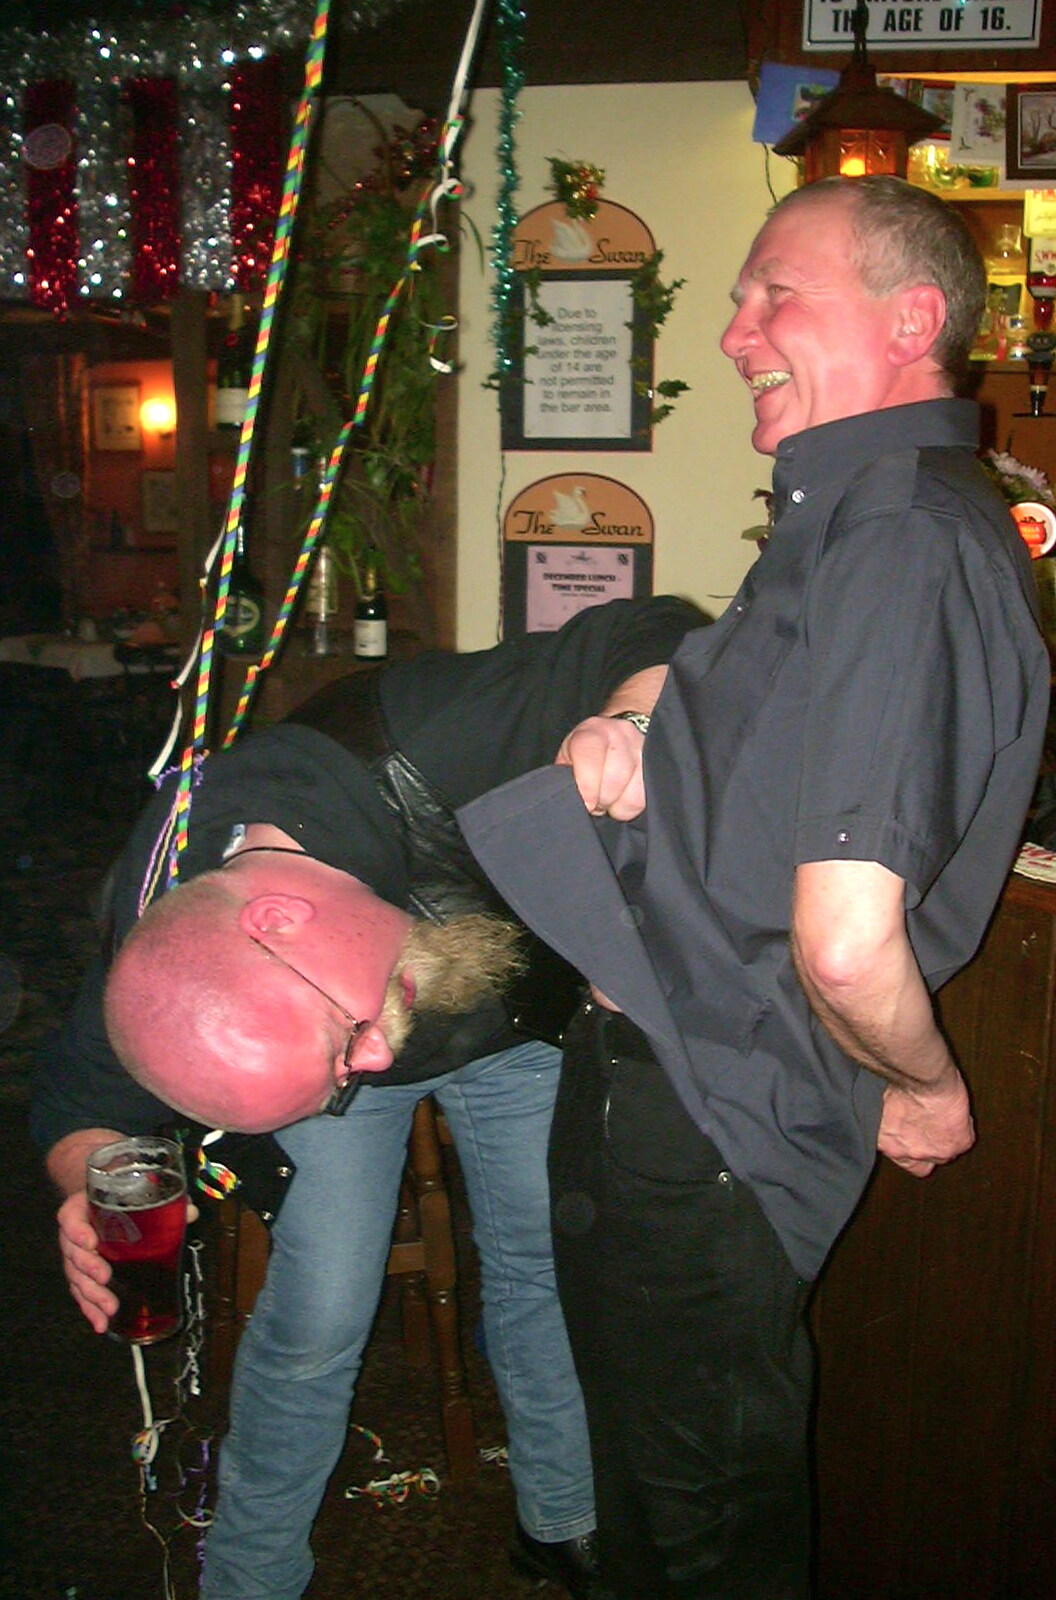 New Year's Eve at the Swan Inn, Brome, Suffolk - 31st December 2002: John Willy gets inspacted